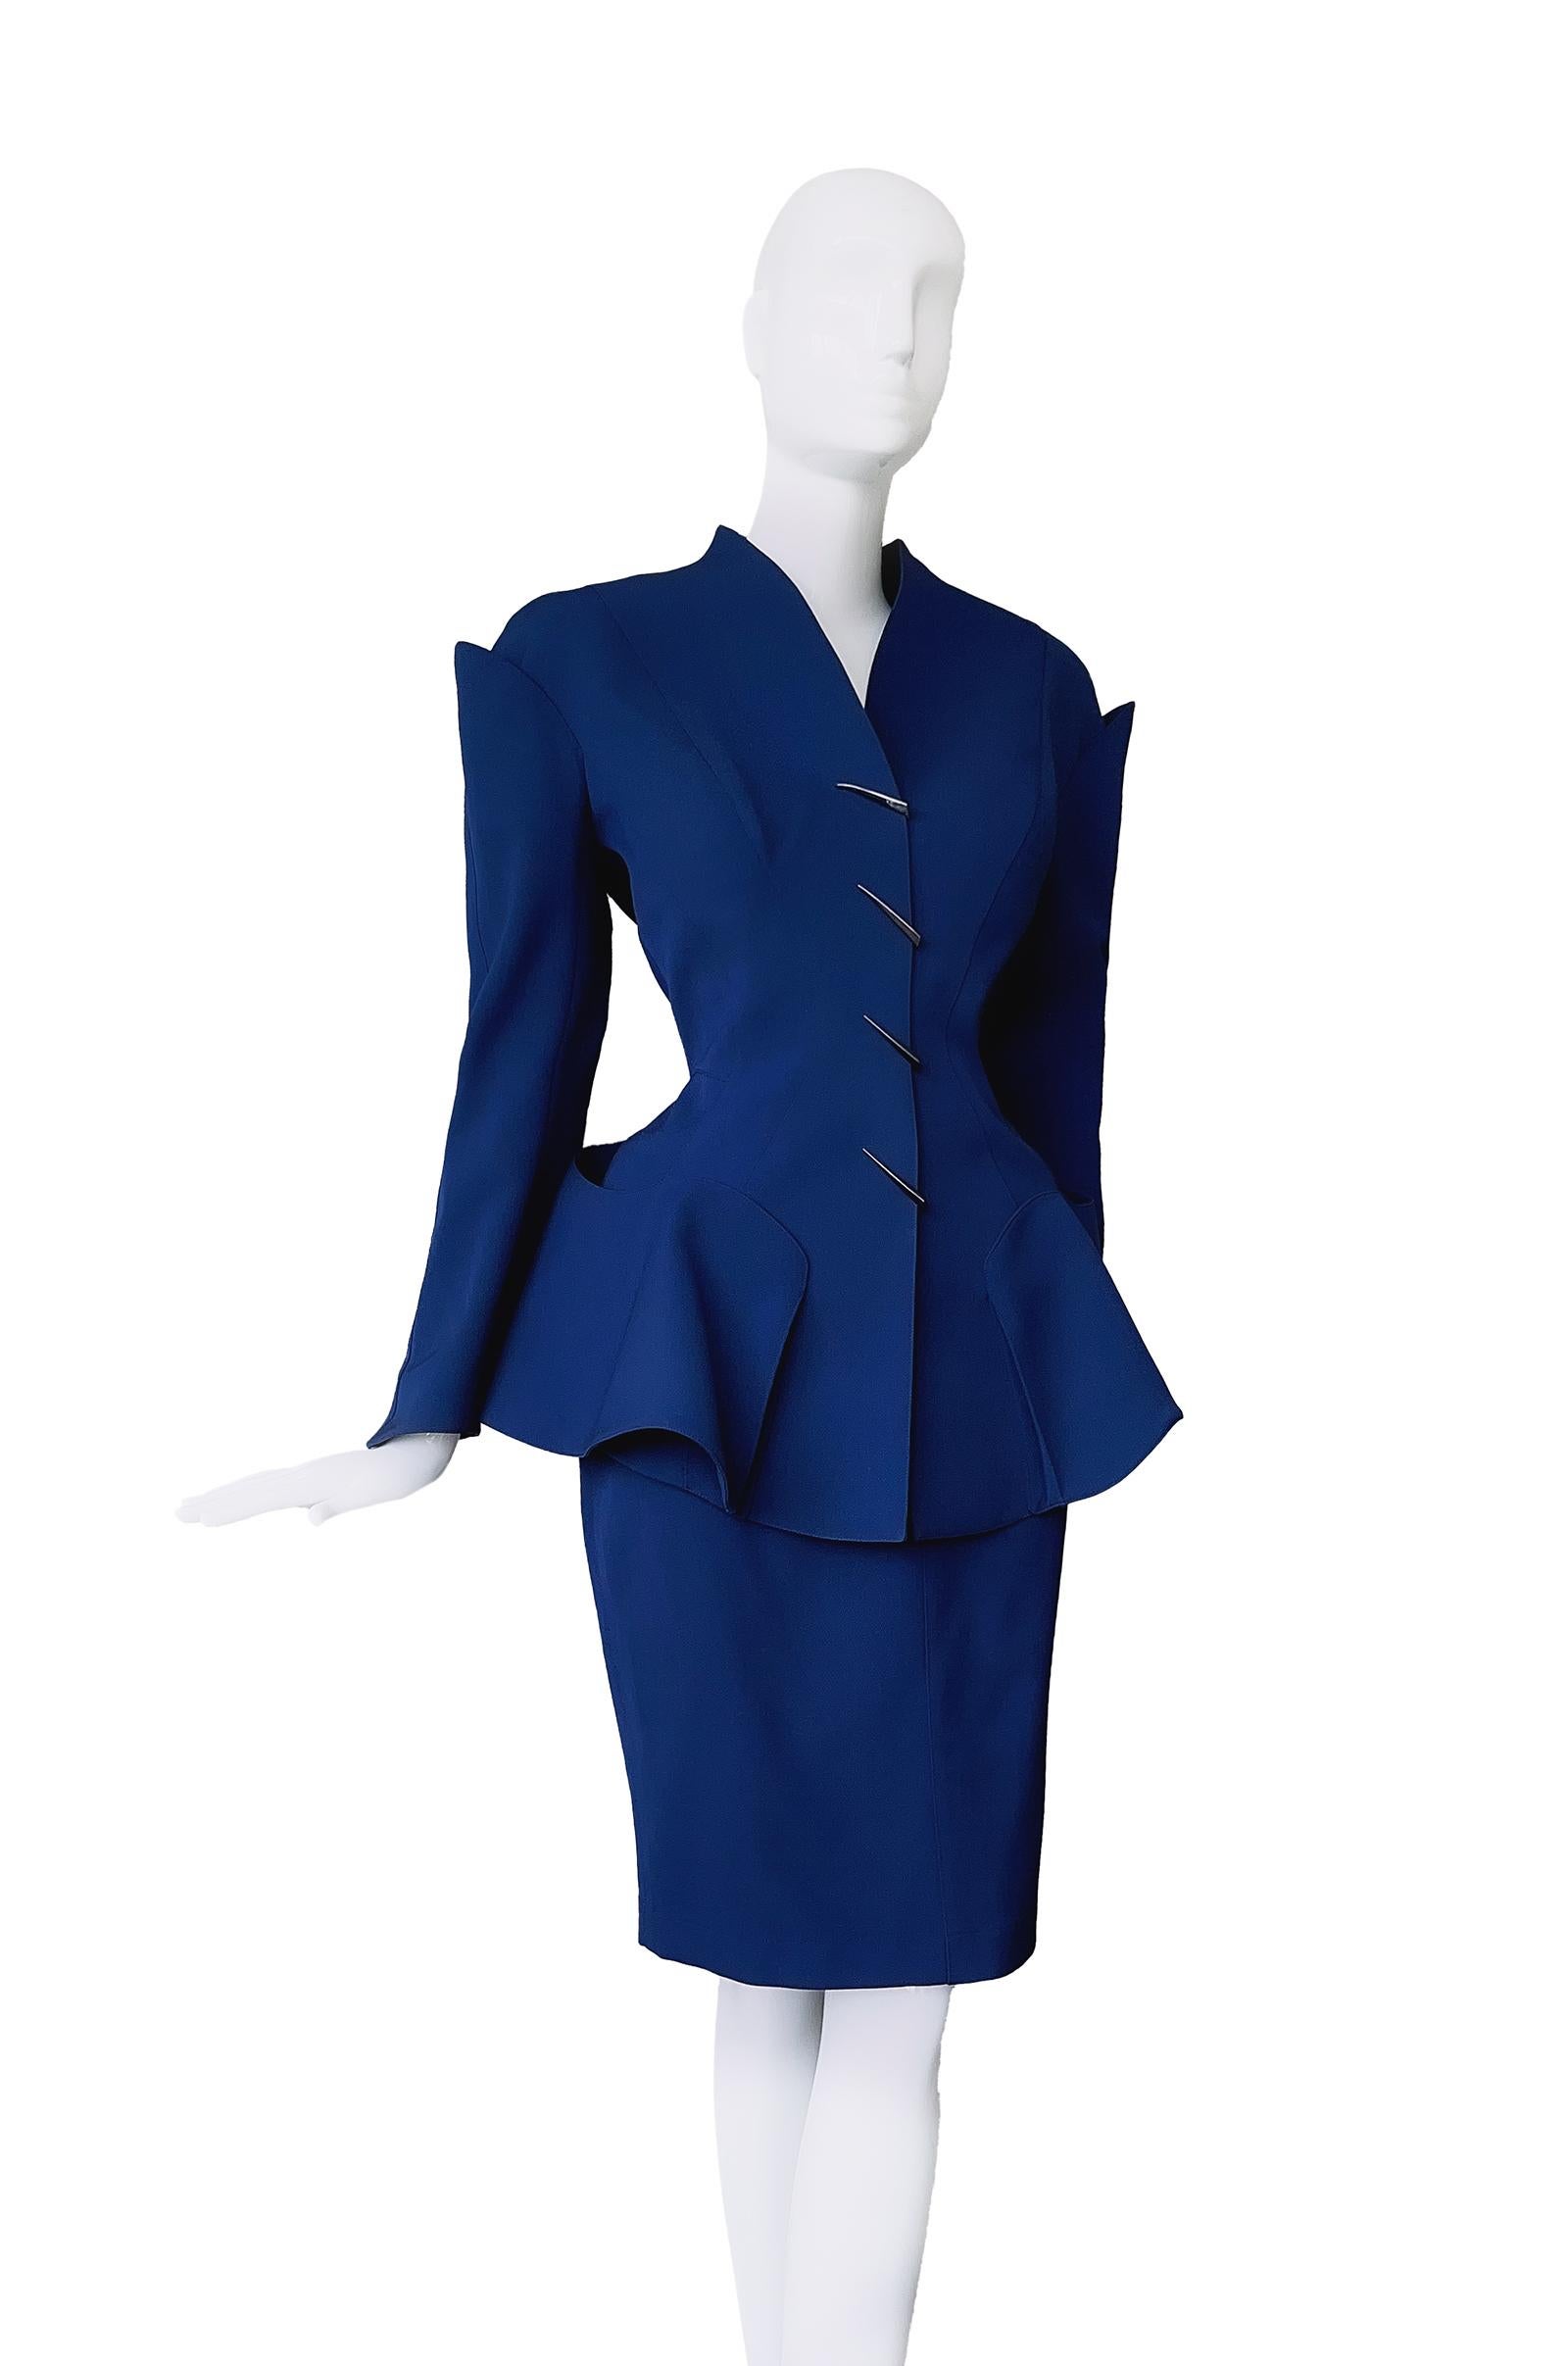 Women's Thierry Mugler Scuptural Suit  FW 1995  Architecture Collection Metal Details For Sale